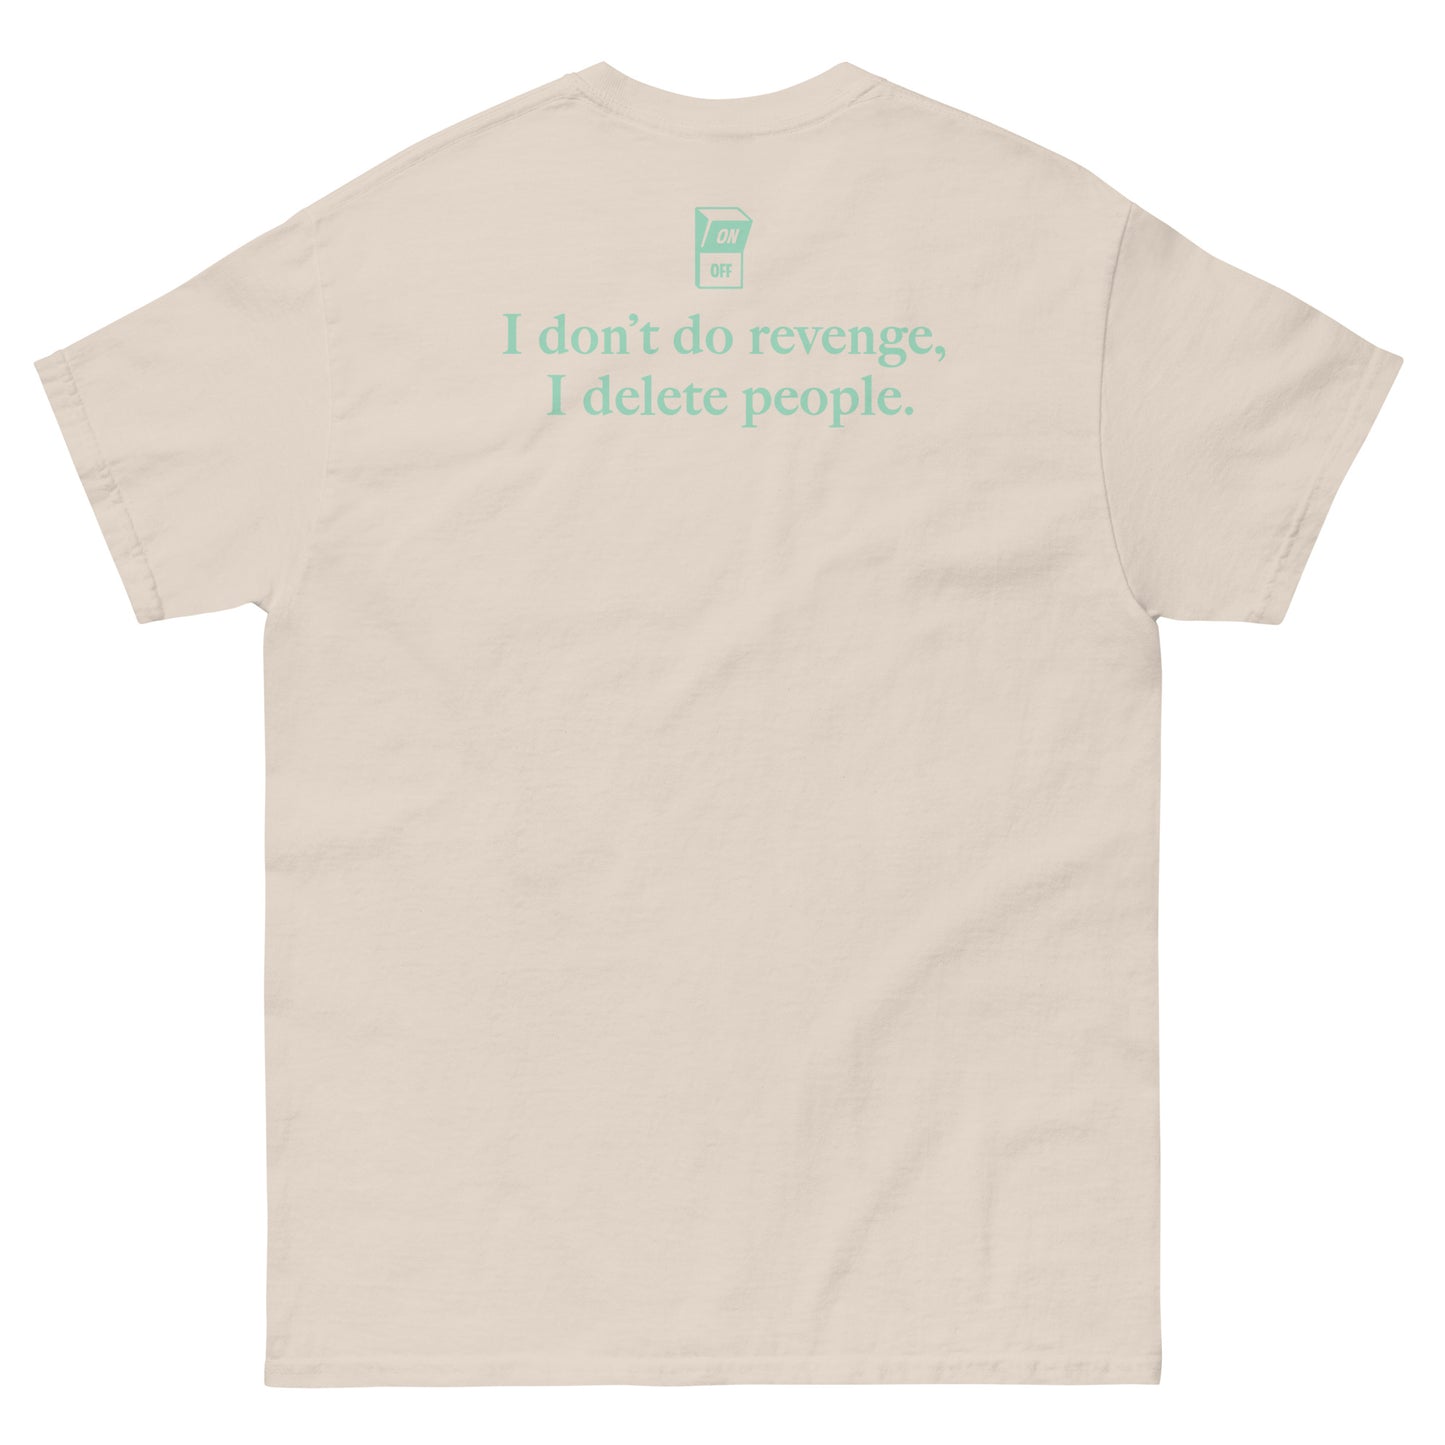 Beige High Quality Tee - Front Design with "I don't do revenge, I delete people. " print on left chest - Back Design with a Phrase "I don't do revenge, I delete people." print